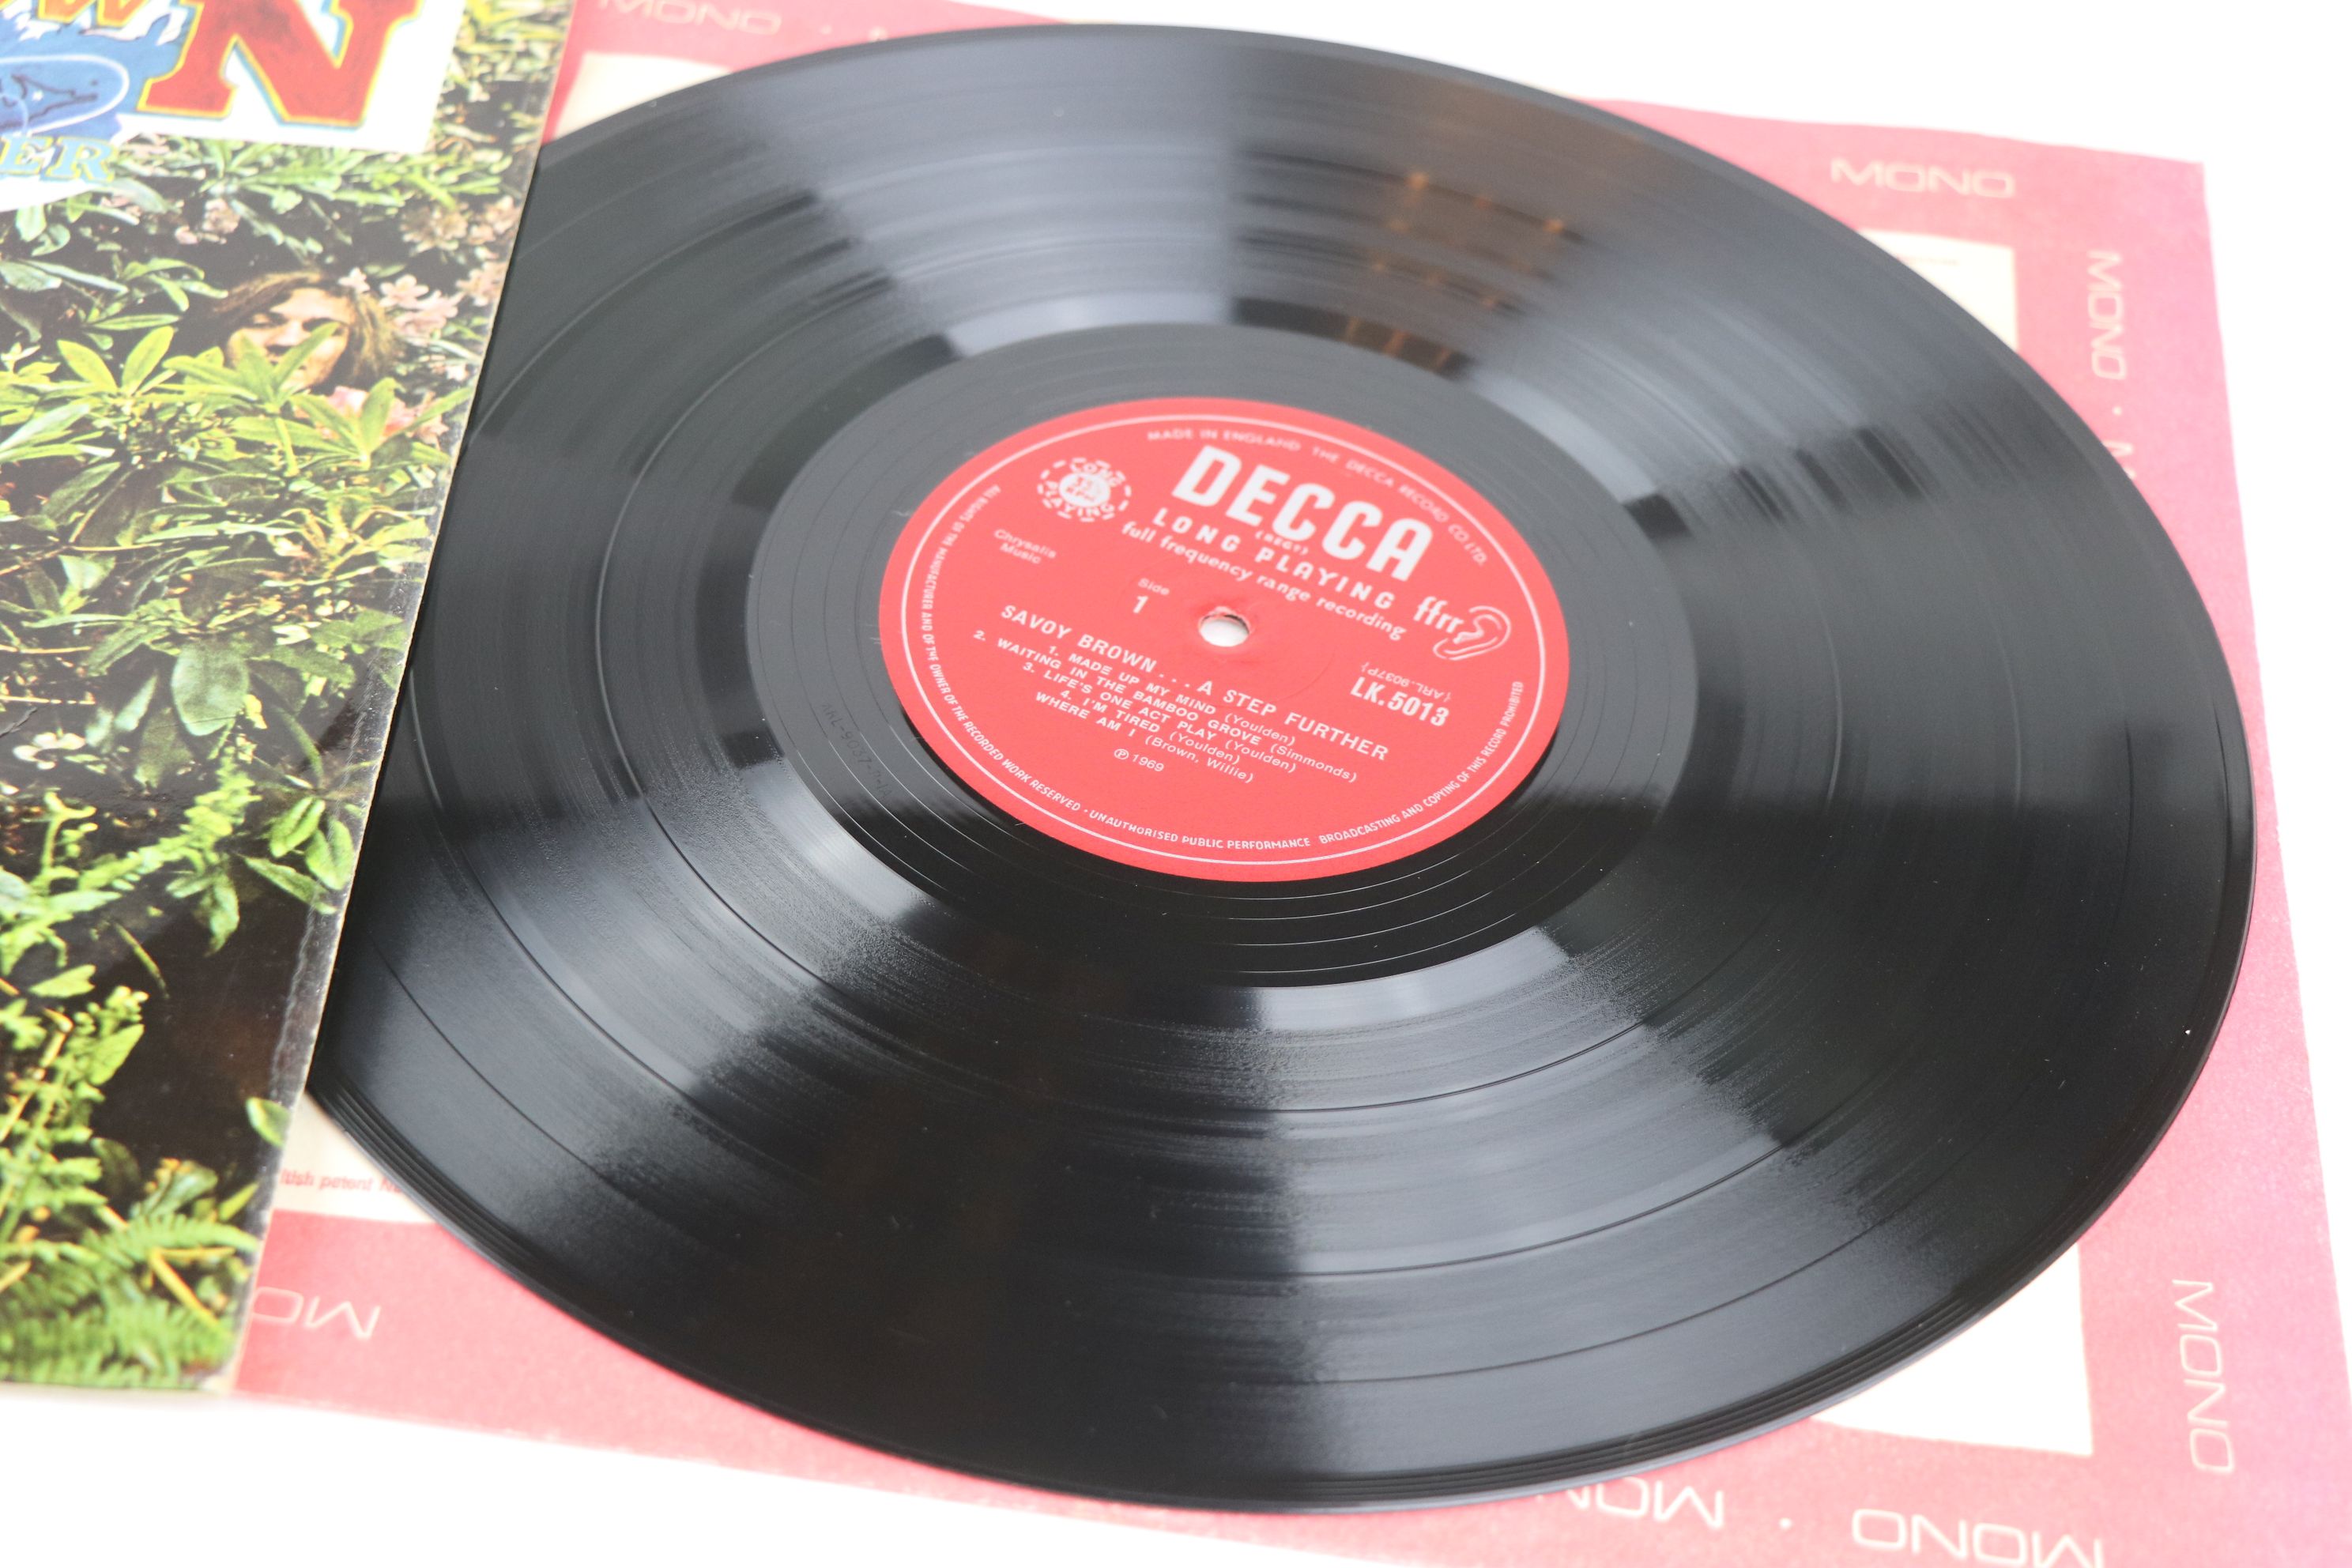 Vinyl - Savoy Brown A Step Further (Decca LK 5013) unboxed Decca red mono label, original red inner. - Image 4 of 6